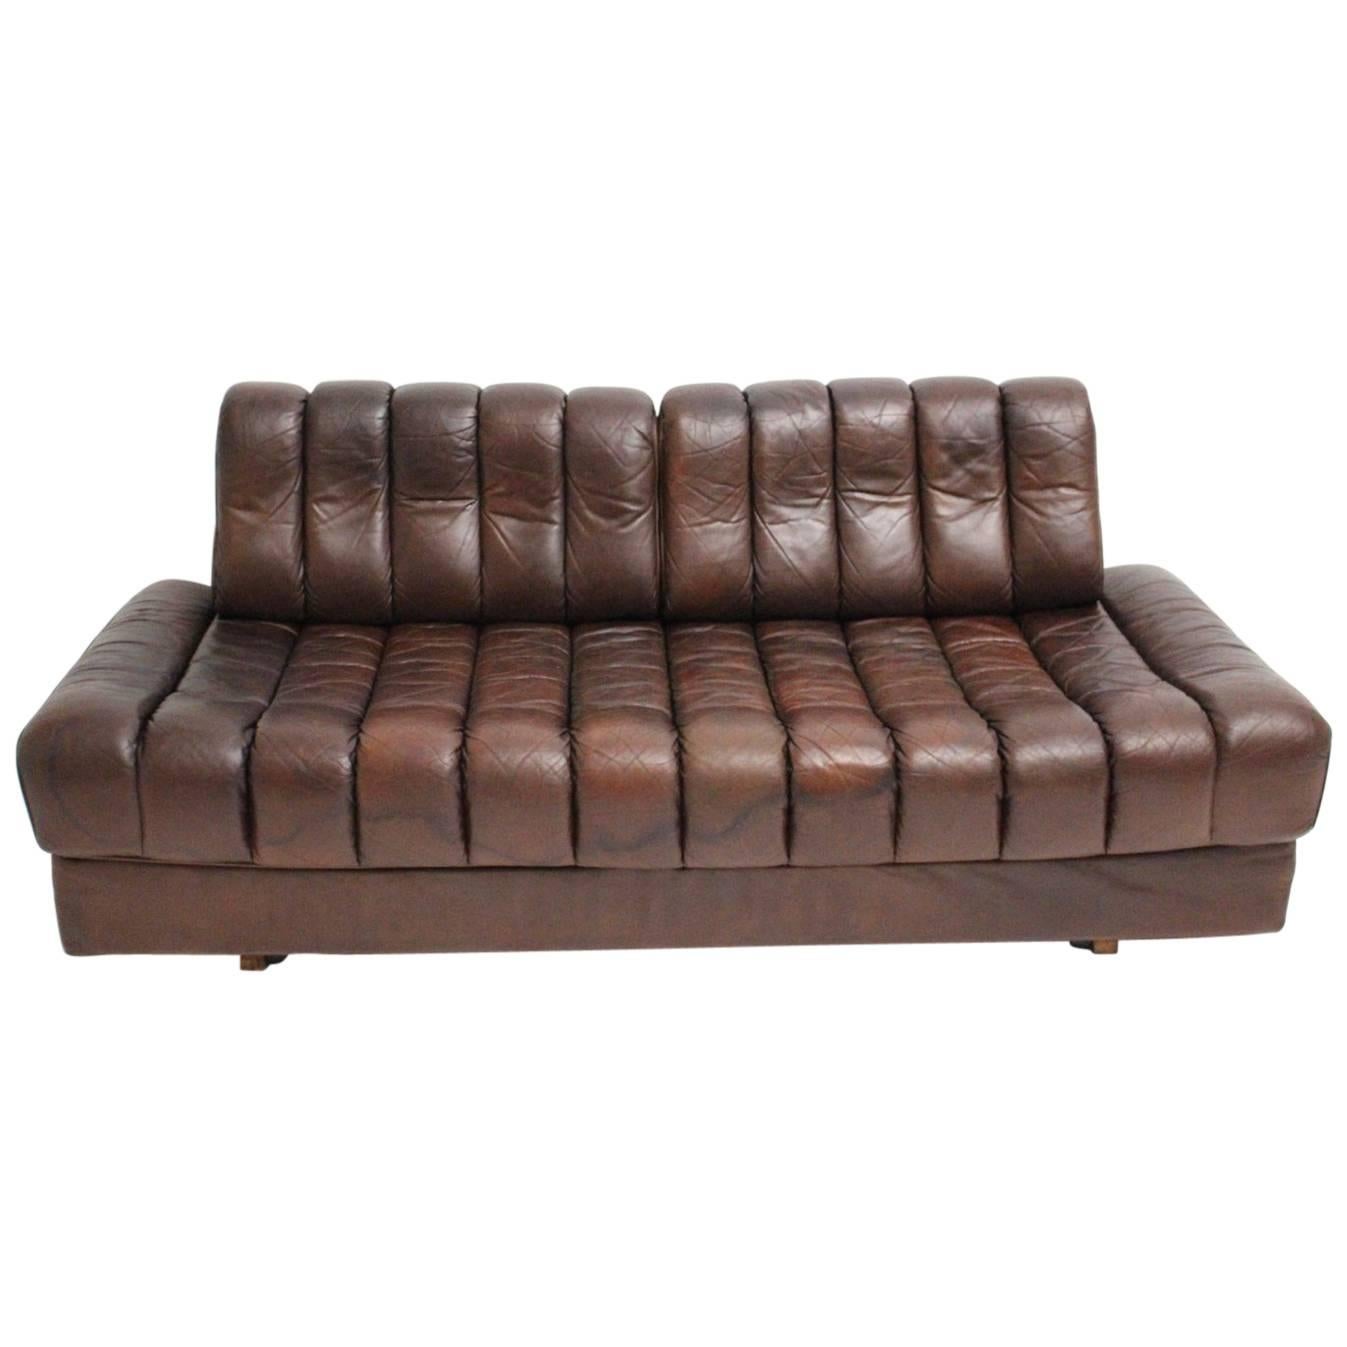 This vintage leather love seat has a special feature - to unfold by one hand into a daybed for two persons.
The leather surface has a great leather patina and the color is a wonderful warm chestnut brown.
This bench has a tube steel bracket on the